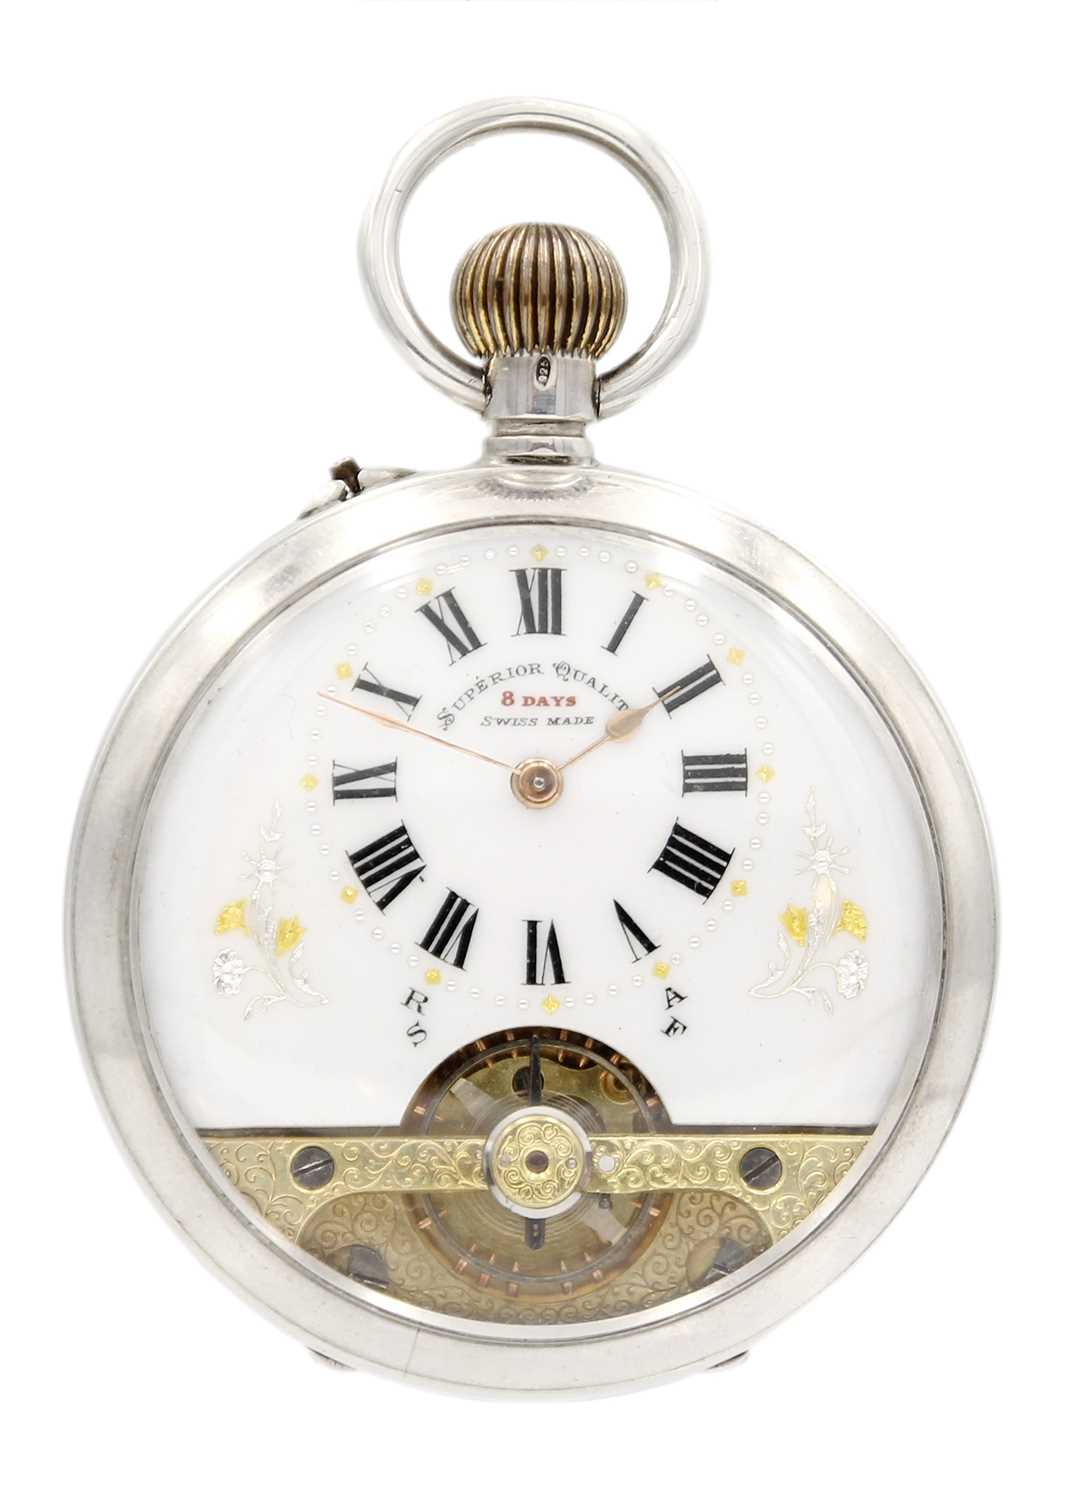 A silver cased crown wind pocket watch with visible escapement dial.